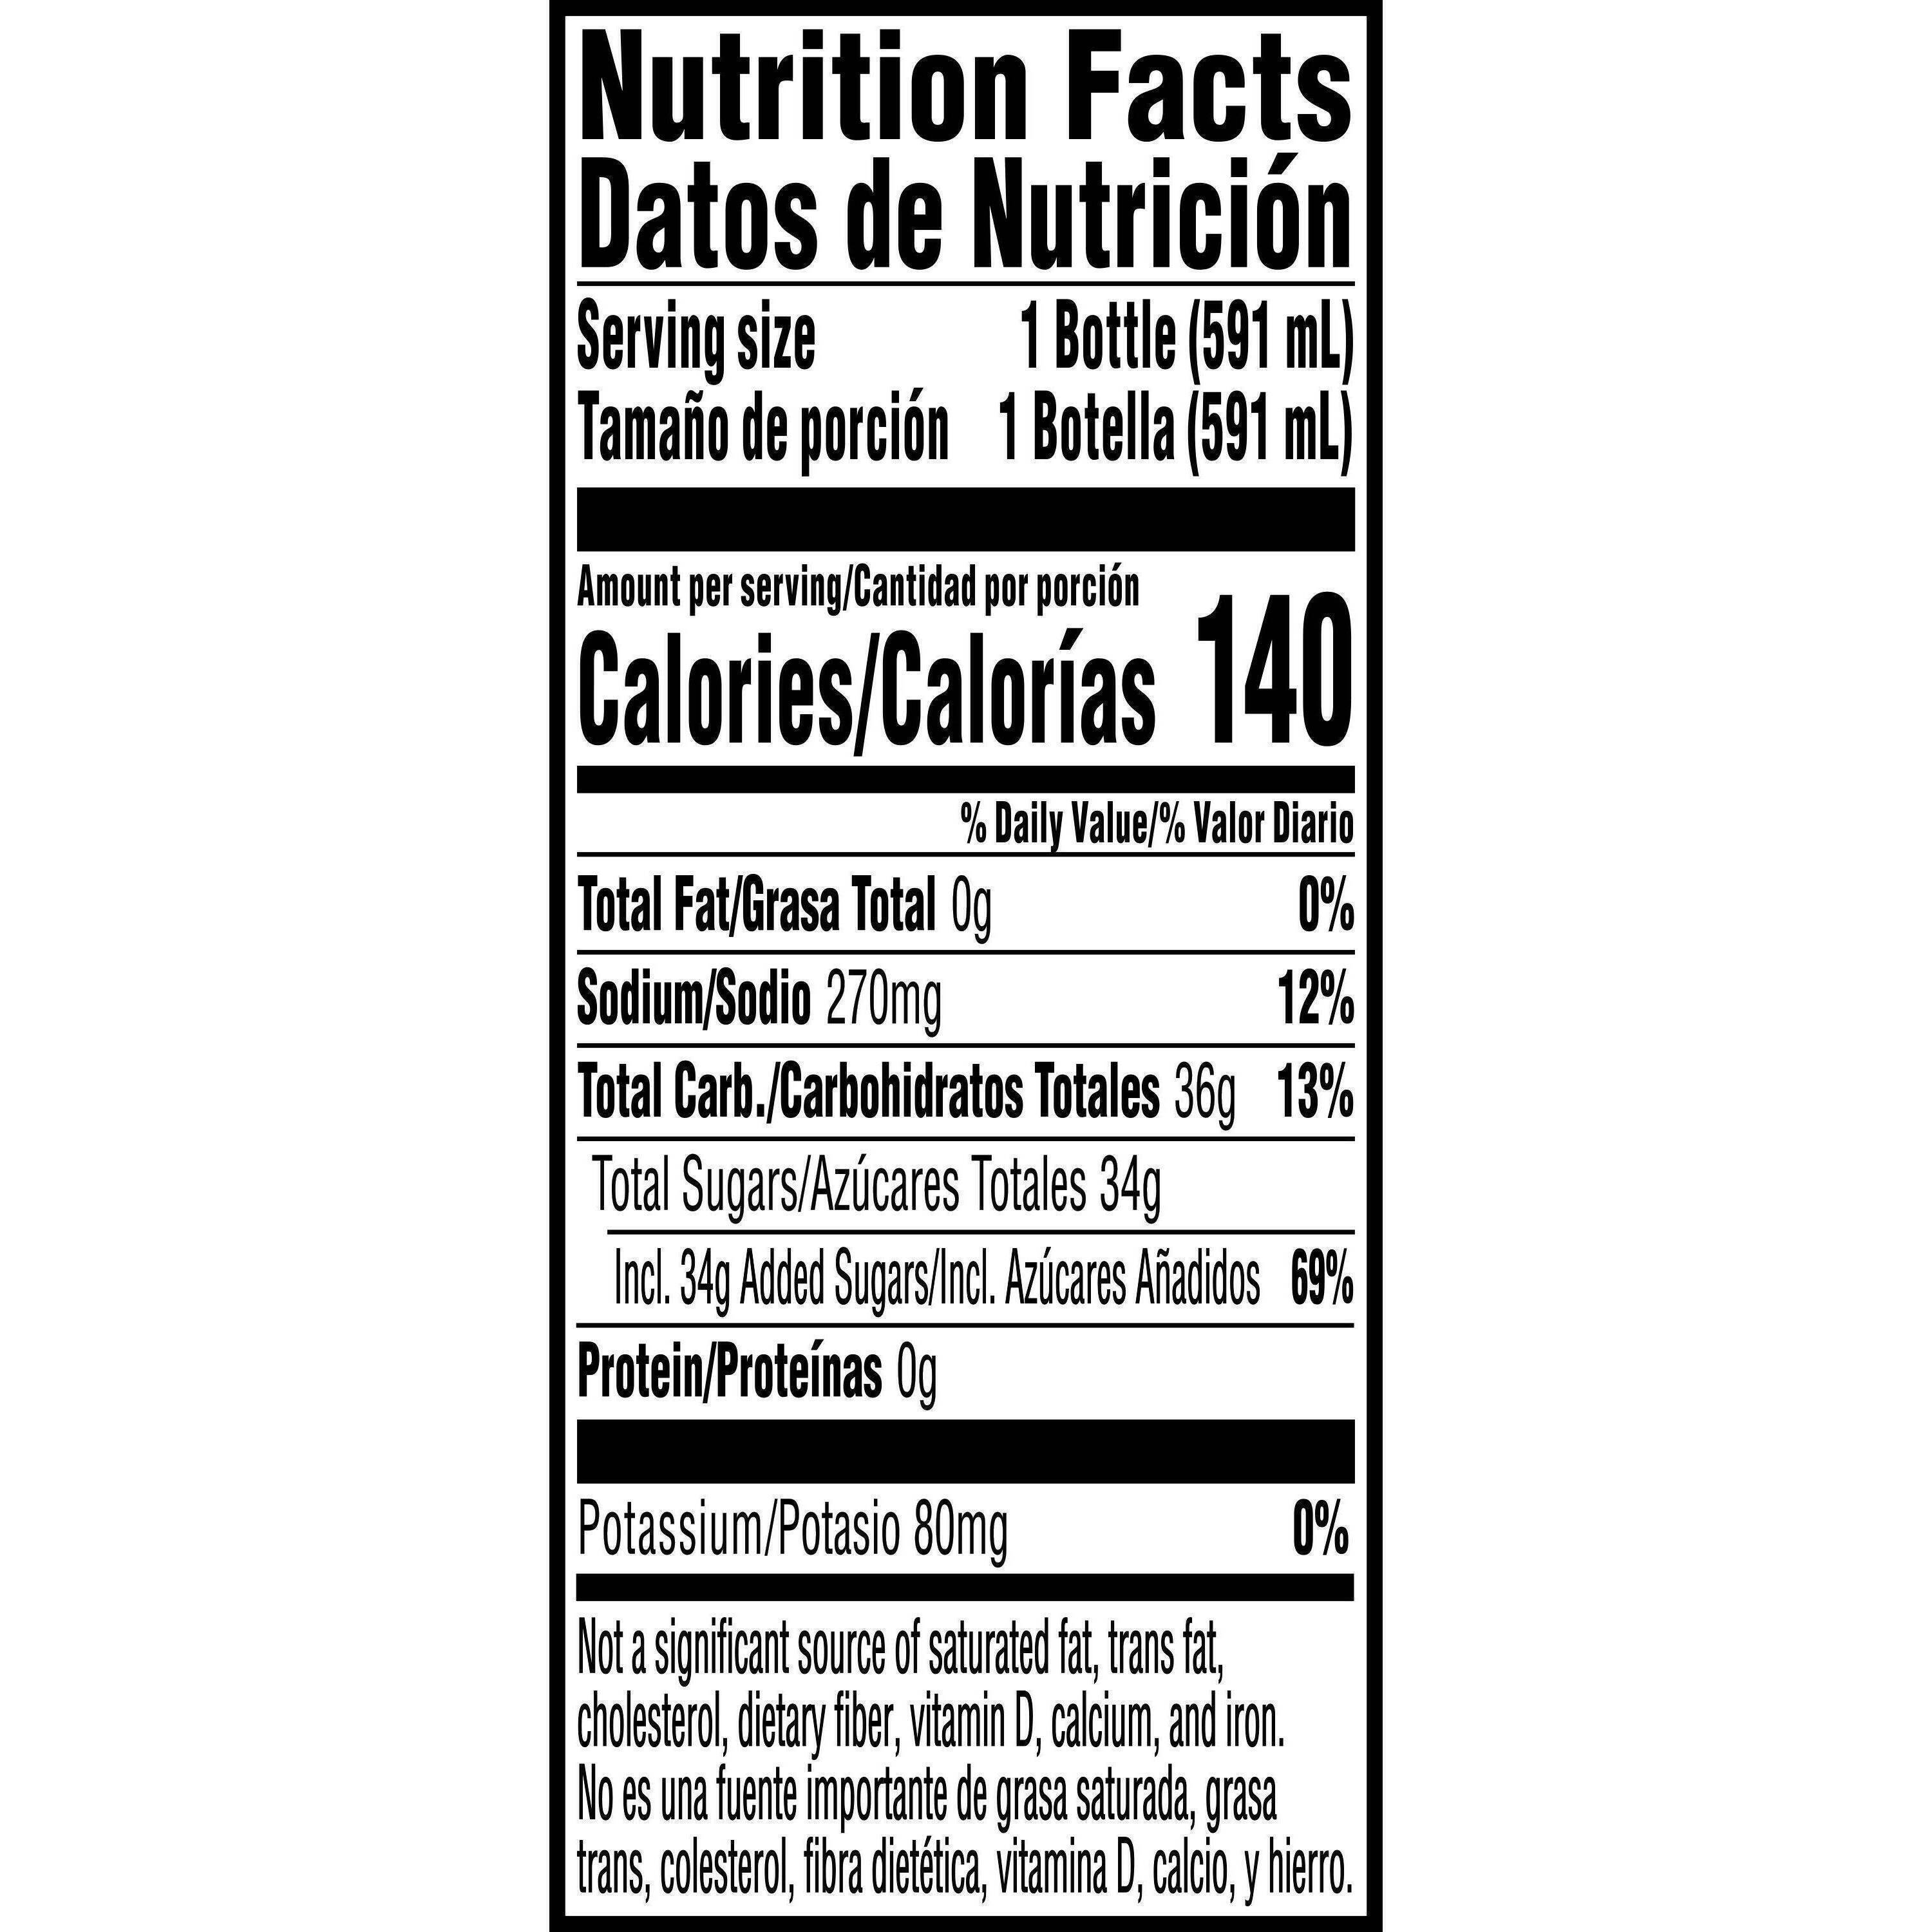 Image describing nutrition information for product Gatorade Lime Cucumber